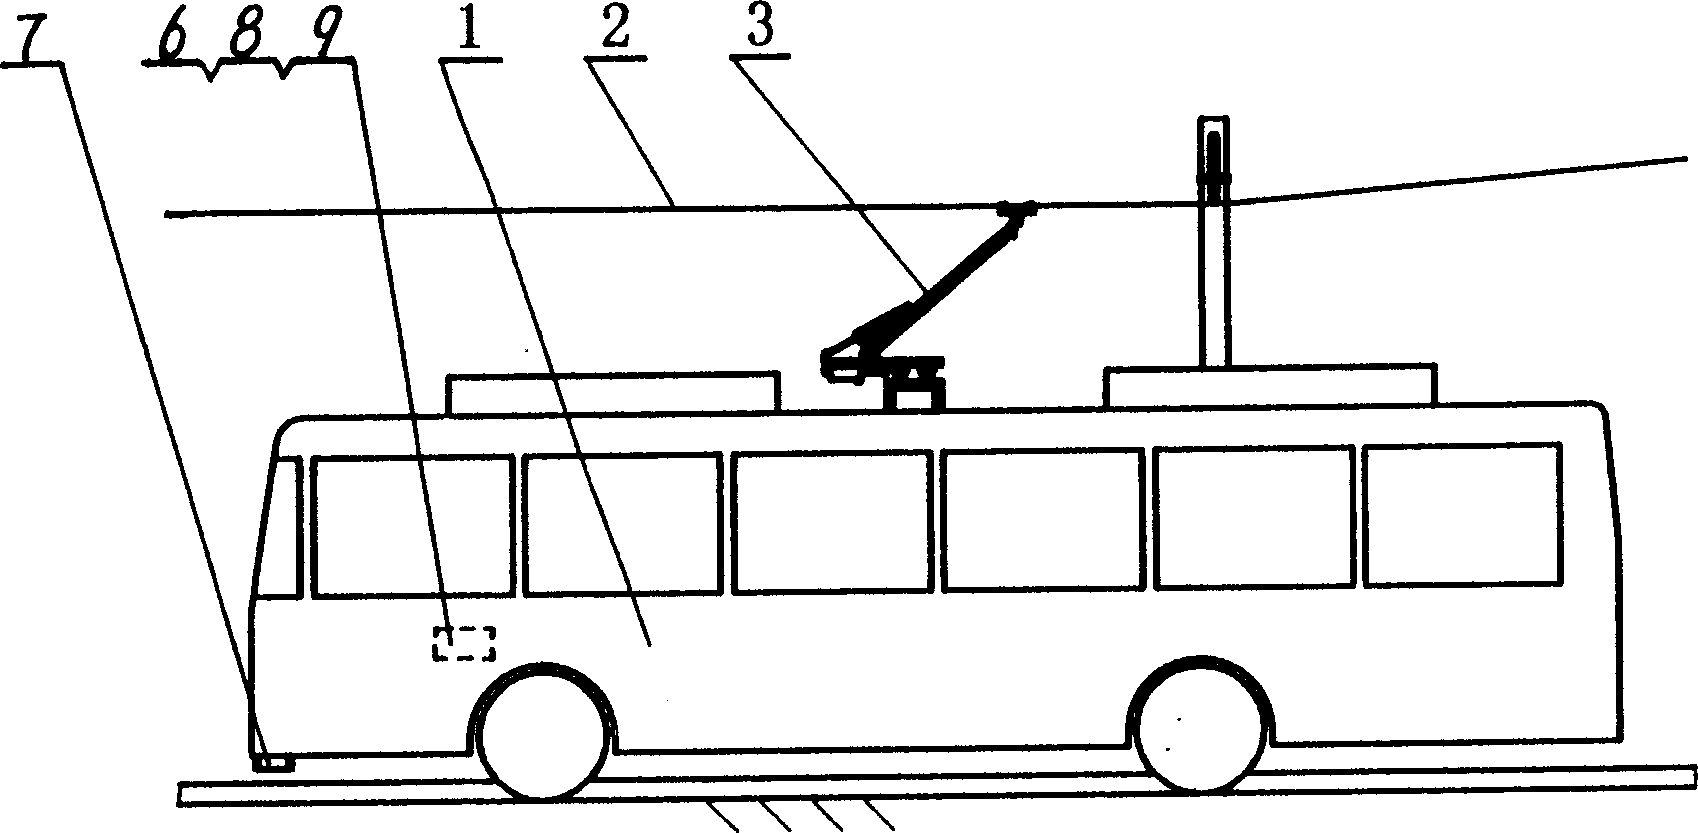 Station-charging trollybus system